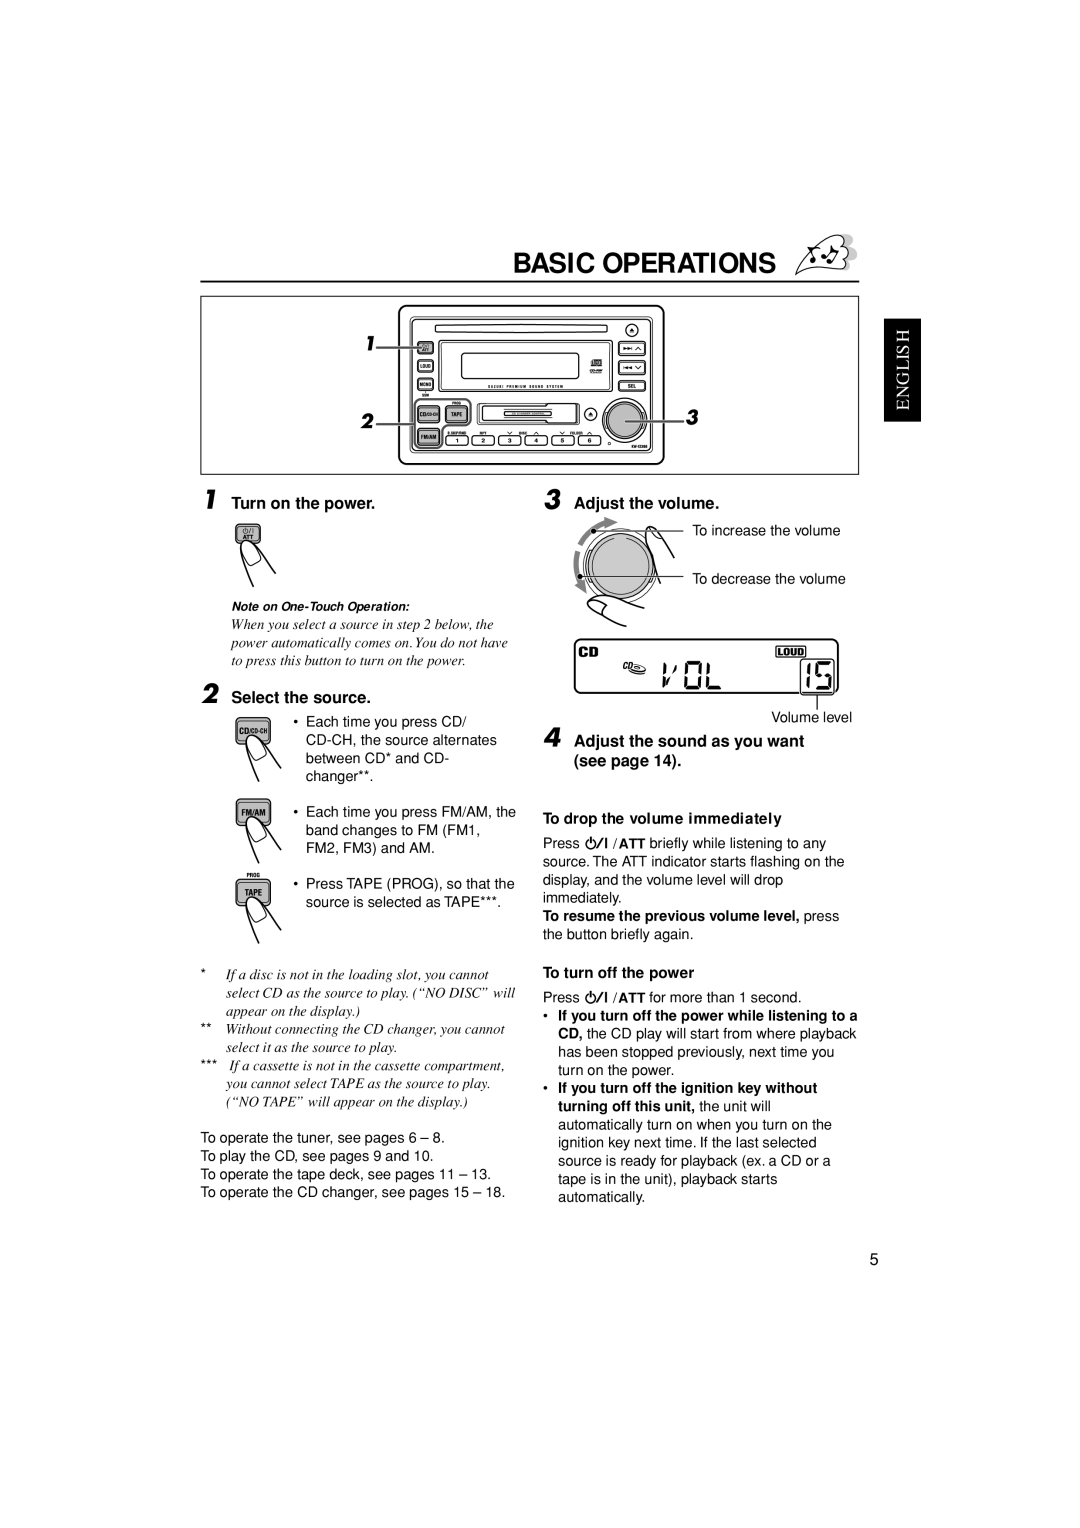 JVC KW-XC888, LVT1139-002A manual Basic Operations, To drop the volume immediately, To turn off the power 